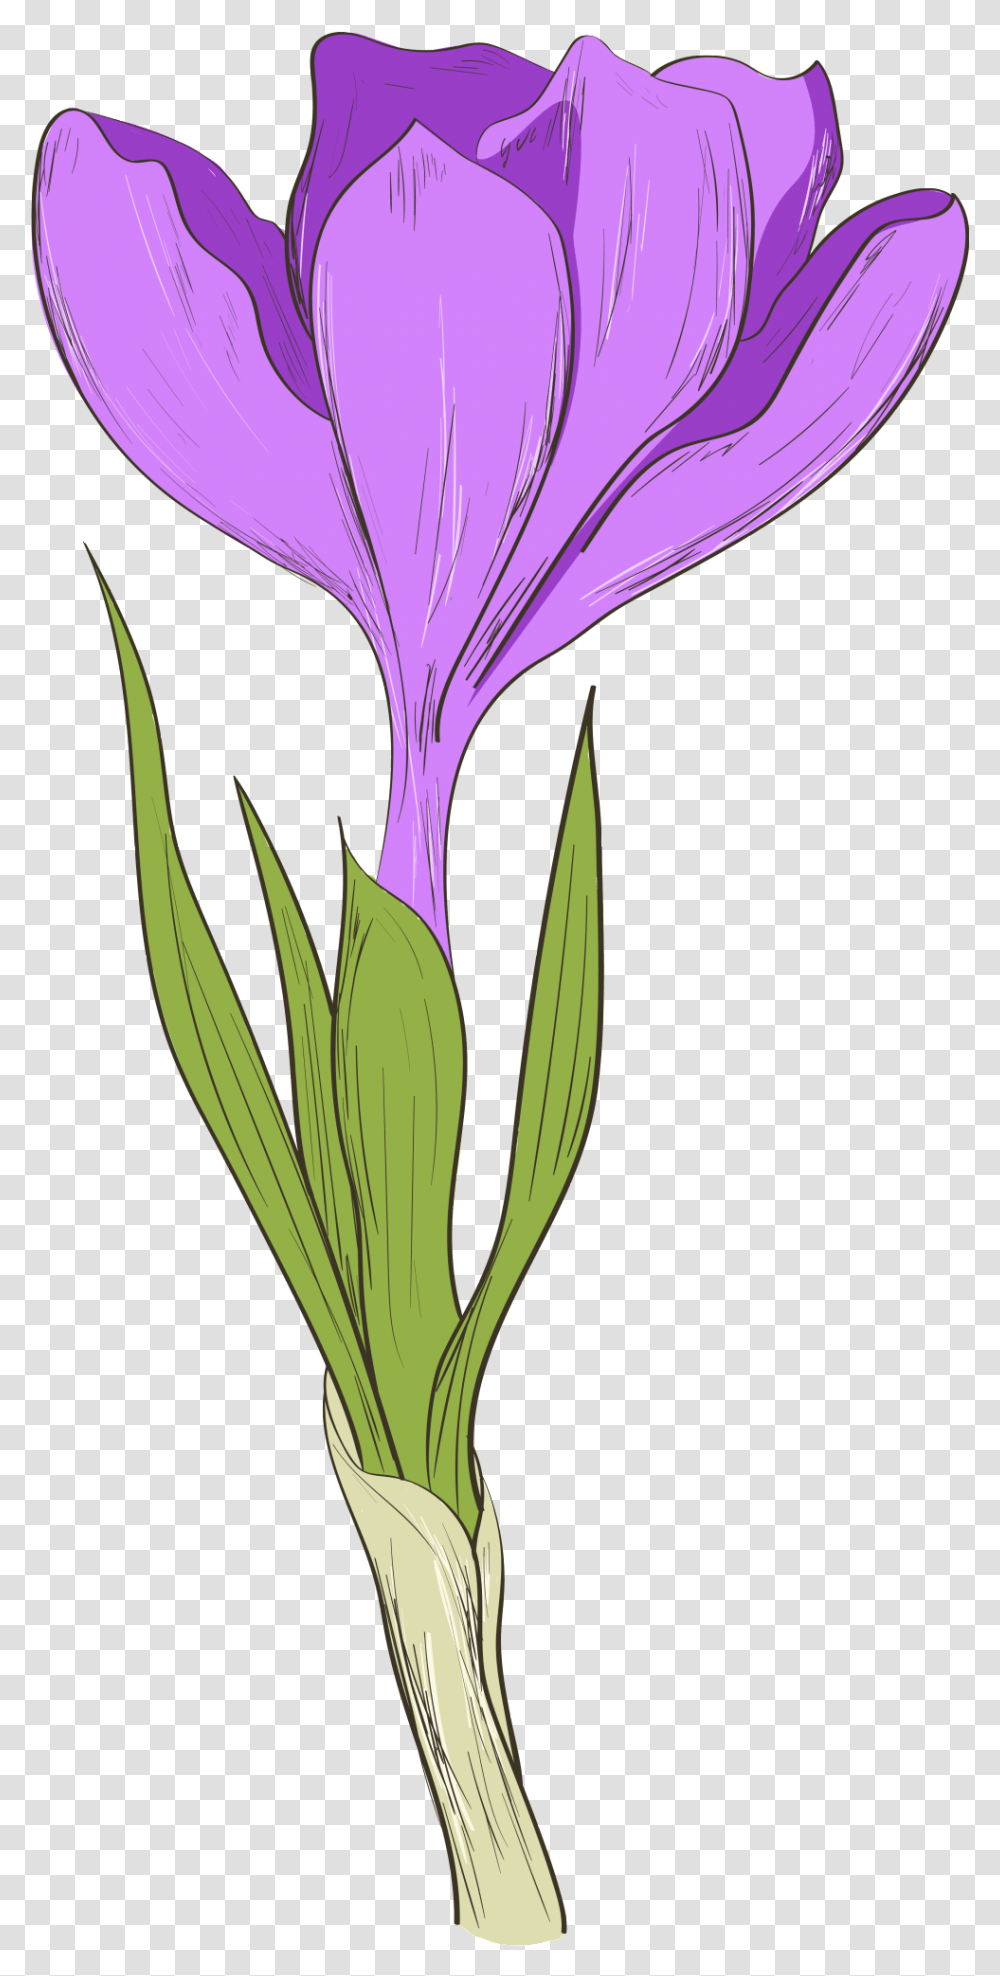 Download This Graphics Is Hand Painted A Purple Flower Iris Flower Cartoon, Plant, Blossom, Petal, Flax Transparent Png